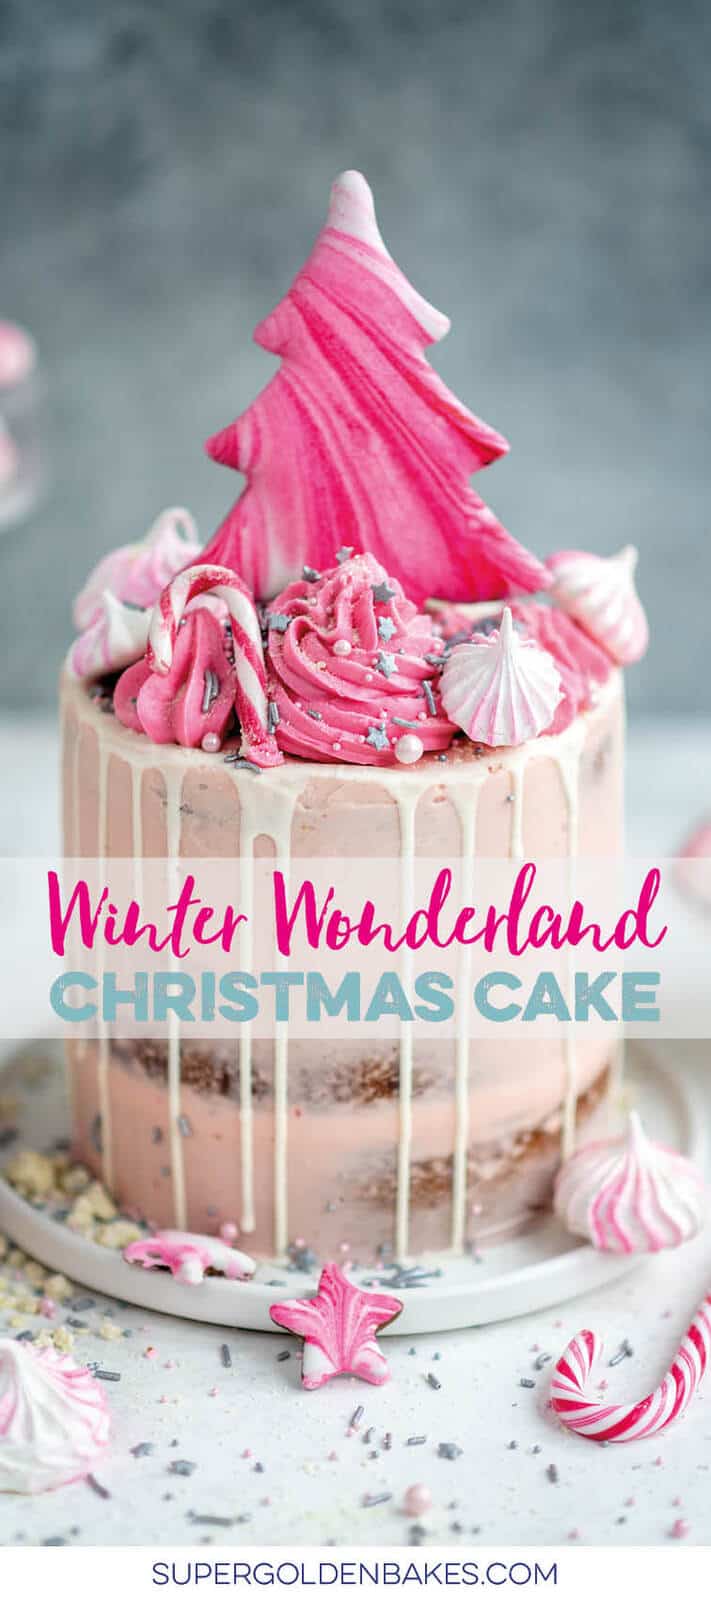 Showstopping cranberry Christmas cake